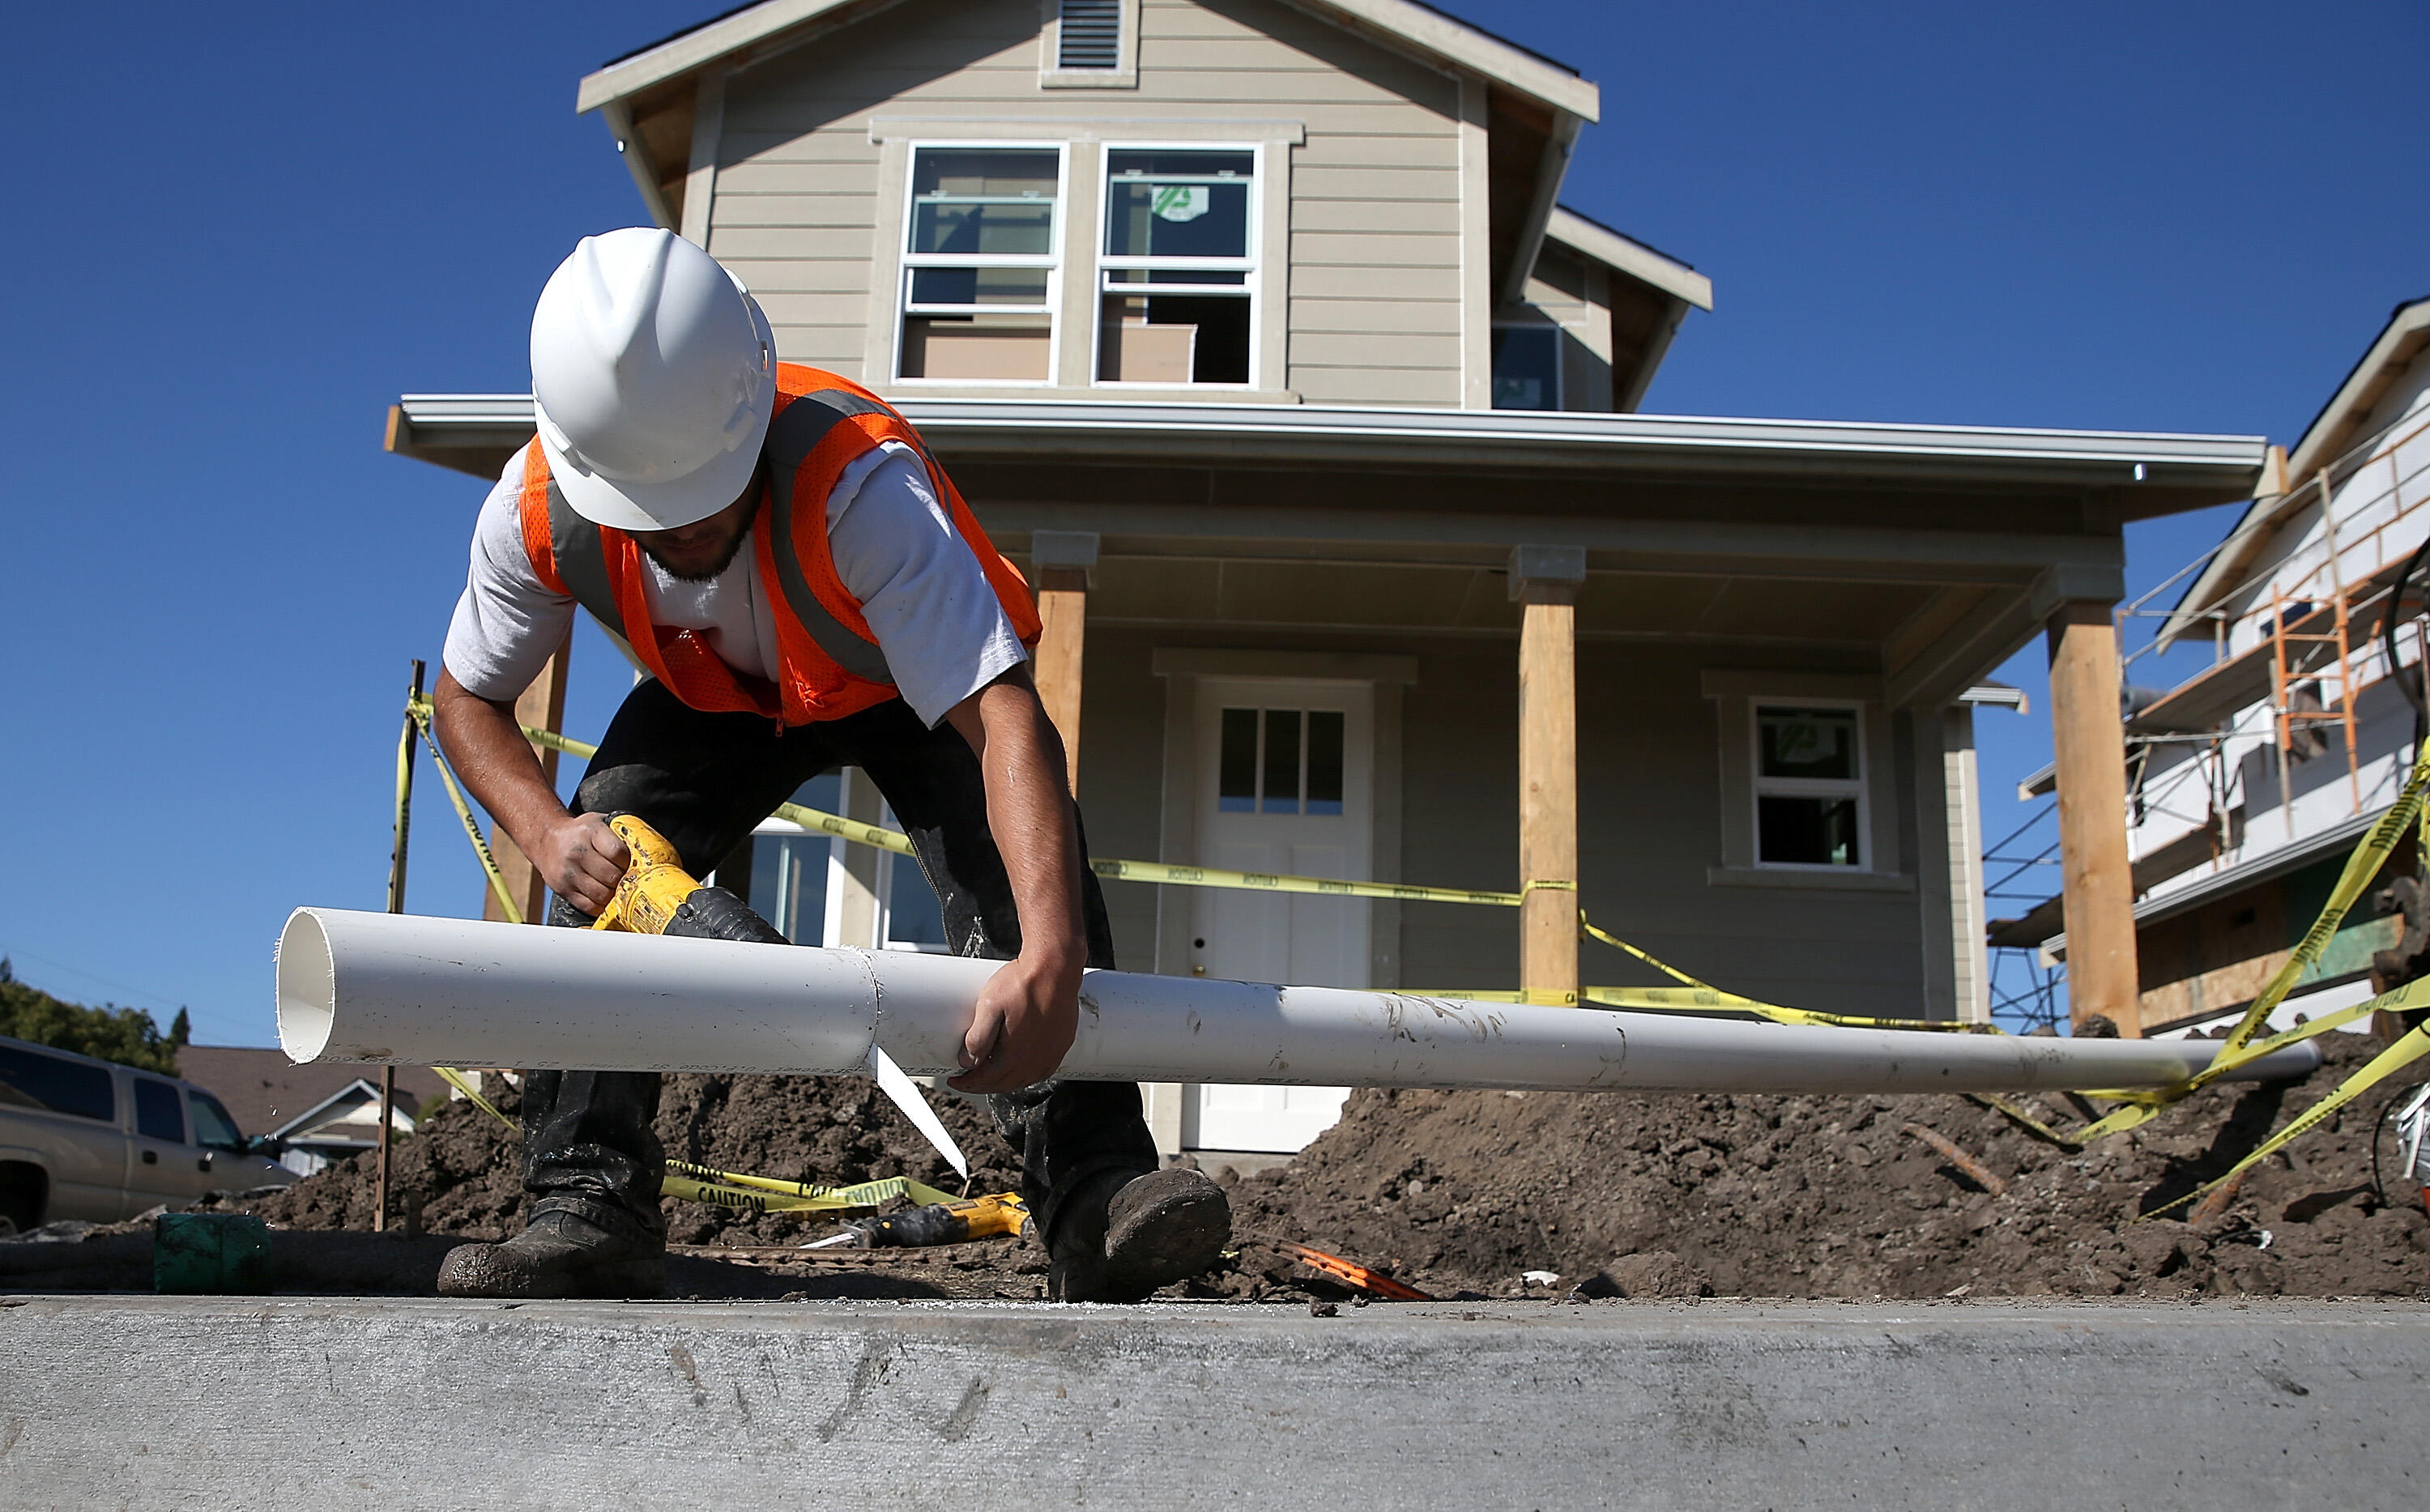 PETALUMA, CA - JANUARY 21:  A worker cuts a piece of pipe as he builds a new home on January 21, 2015 in Petaluma, California. According to a Commerce Department report, construction of new homes increased 4.4 percent in December, pushing building of new 